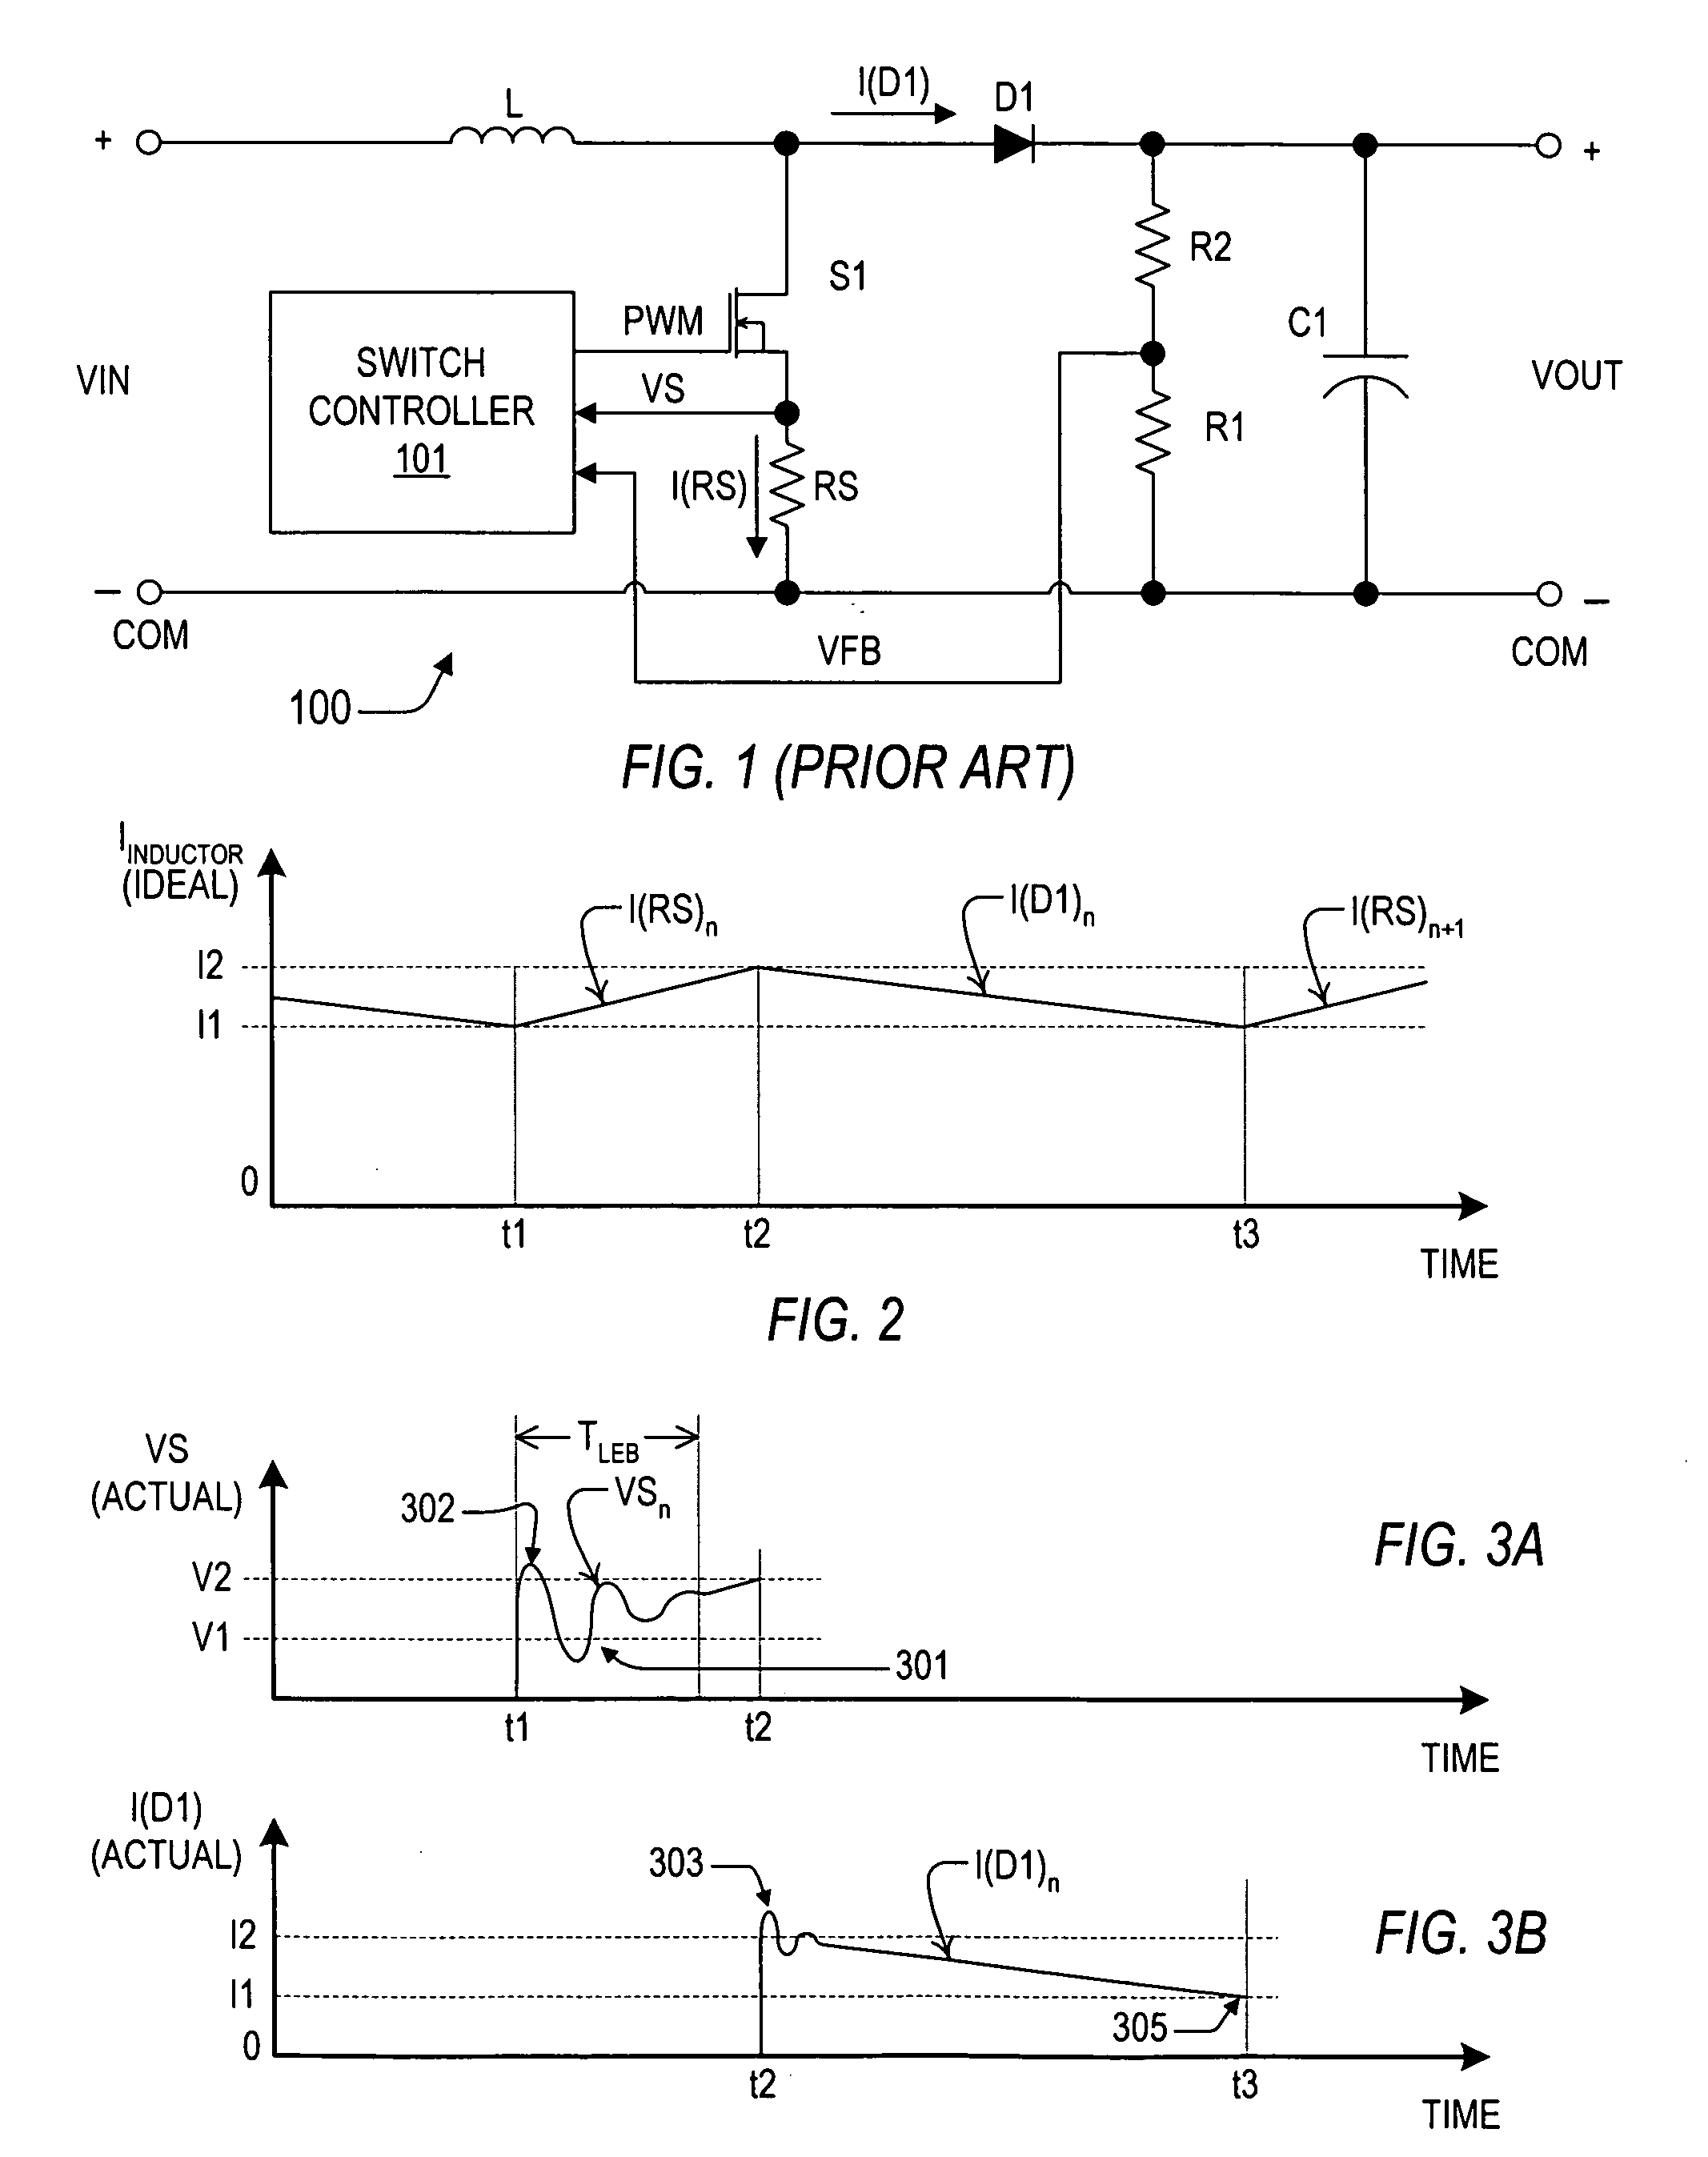 Current replication to avoid LEB restriction of DC-DC boost converter